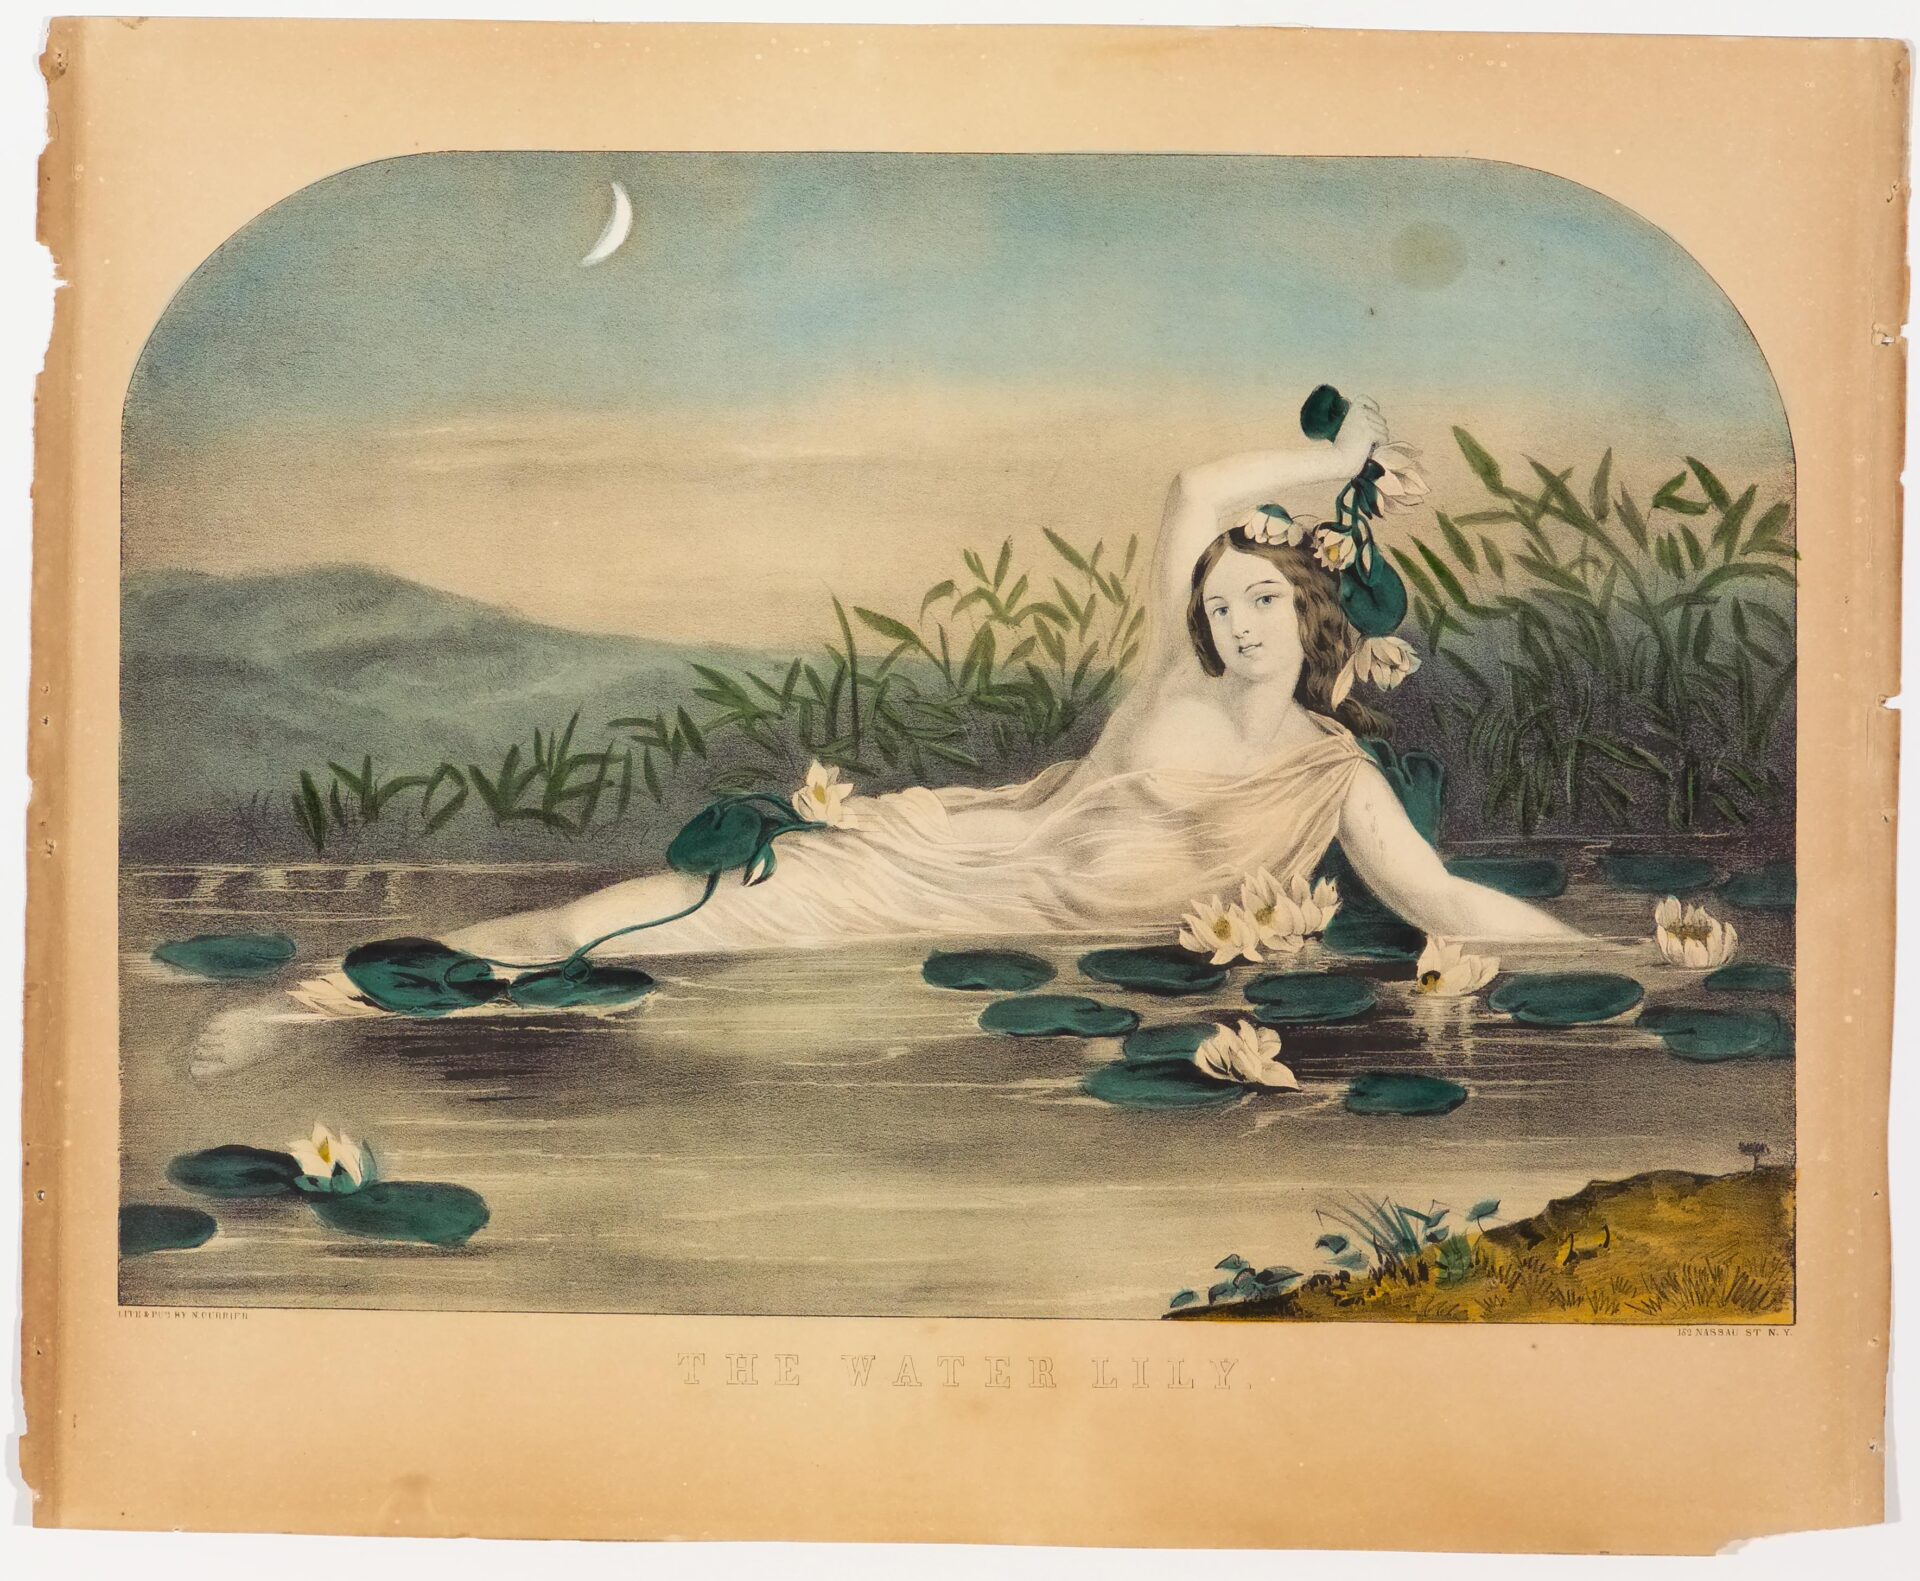 Woman reclining in water amidst lily pads